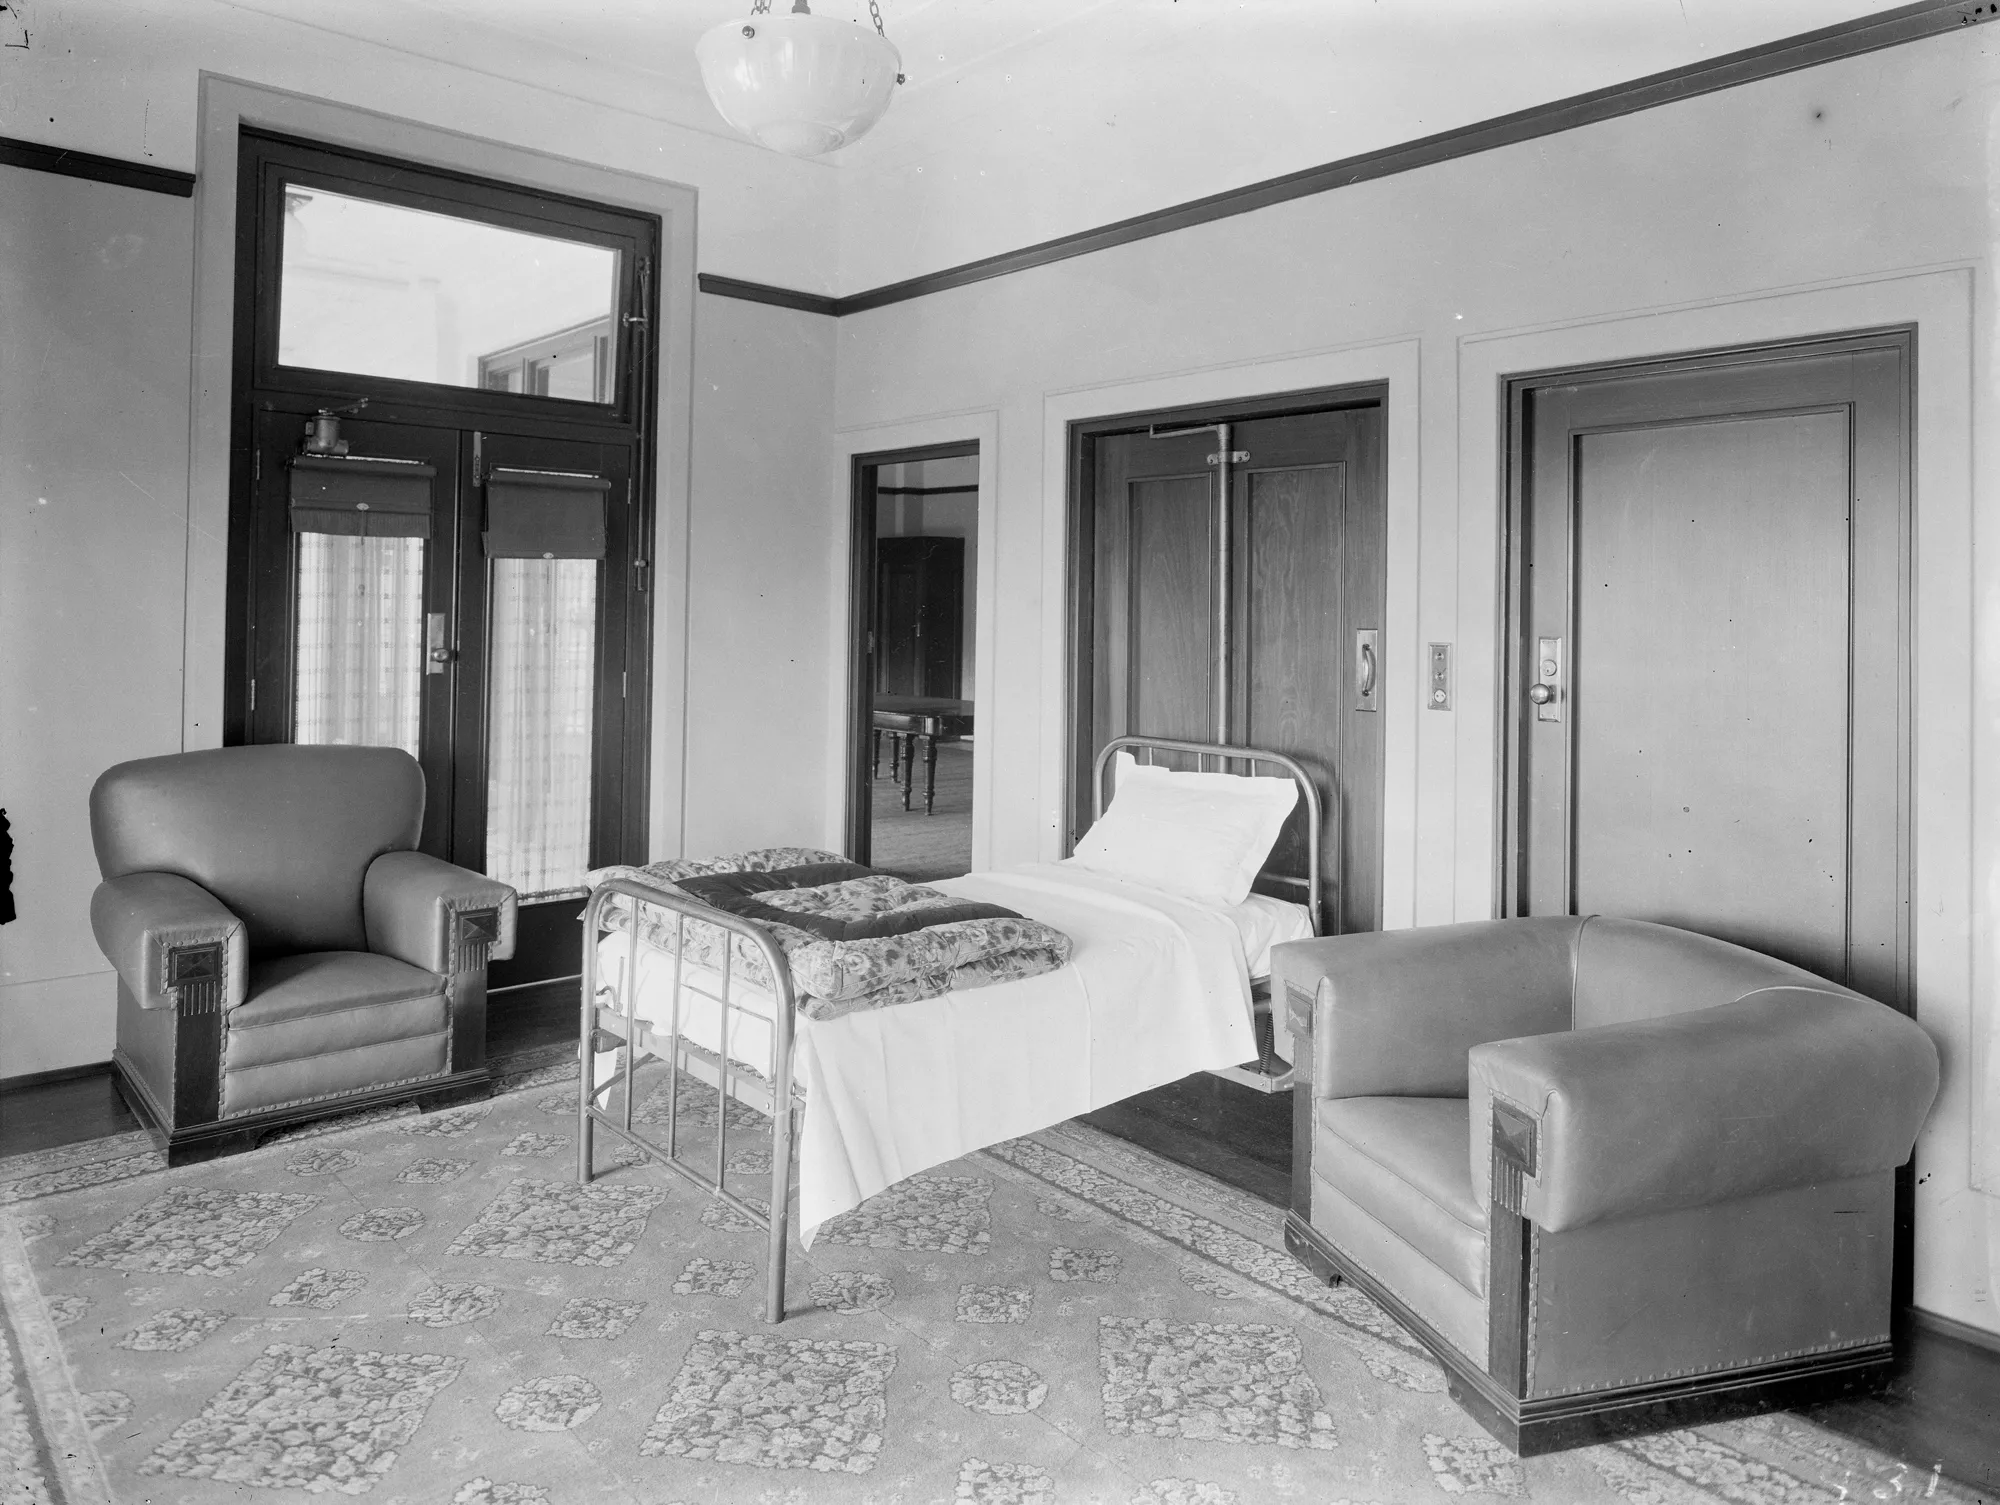 The Speaker's Room, Old Parliament House, with a bed folded out from a cupboard, covered with white sheets, a pillow and a folded floral quilt..